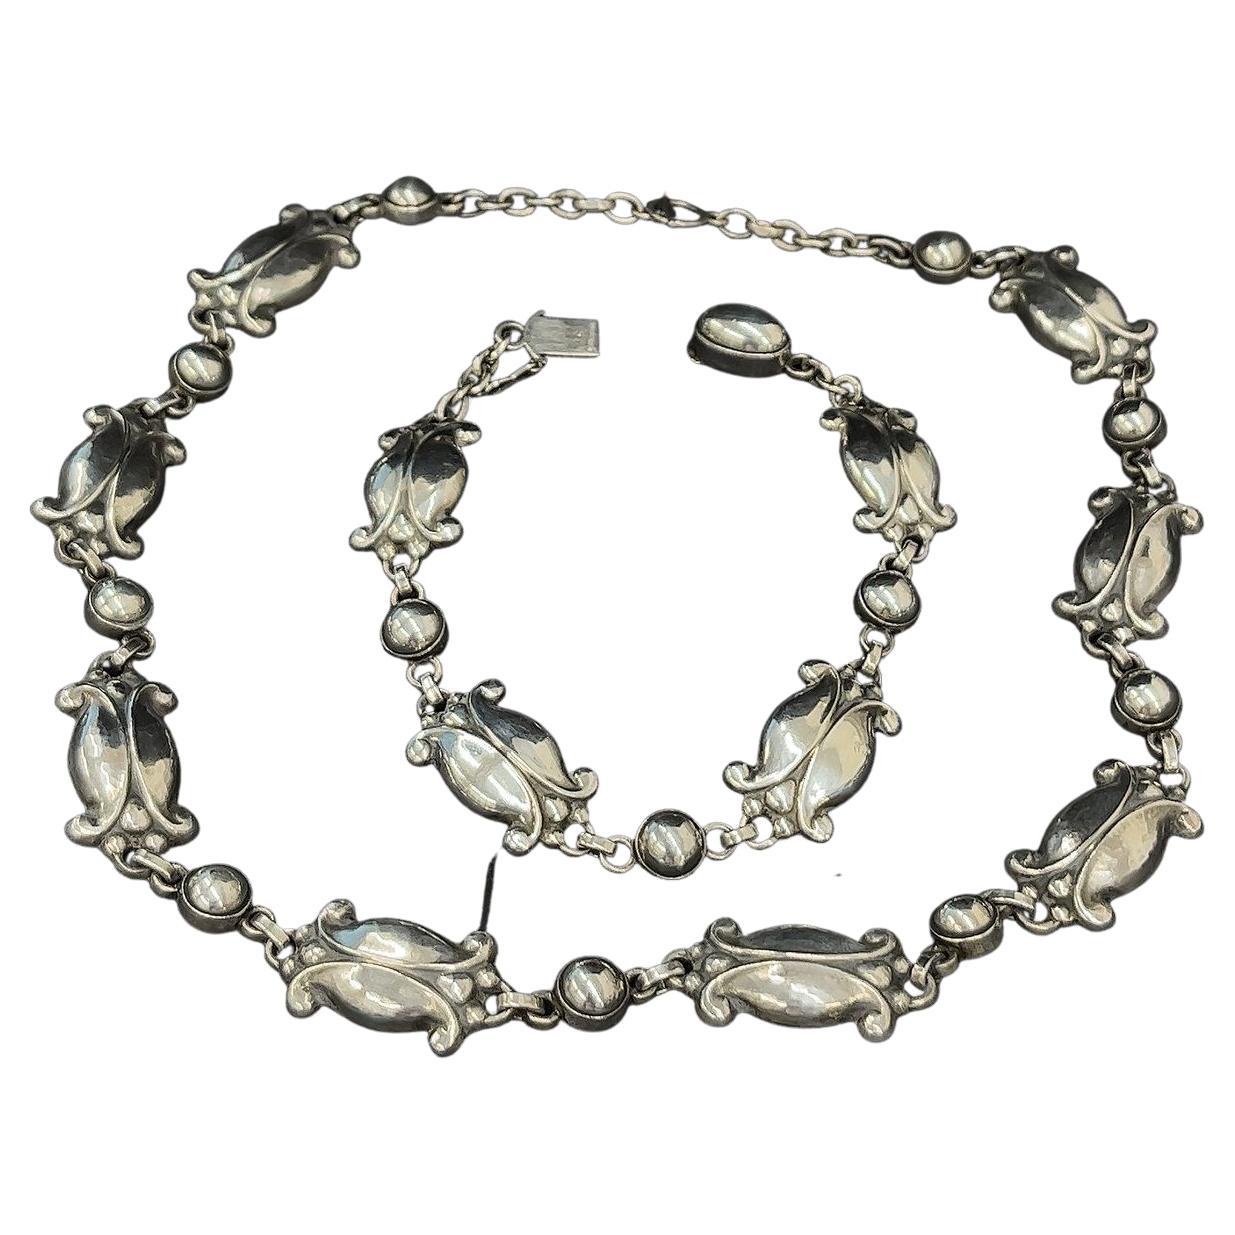 Beautifully designed, this set is a classic Georg Jensen Necklace Sterling No 15 Moonlight Blossom Vintage 1970s necklace with matching no 11 bracelet  
Total Weight: 33.3g necklace, 19.3g bracelet
Length: 16